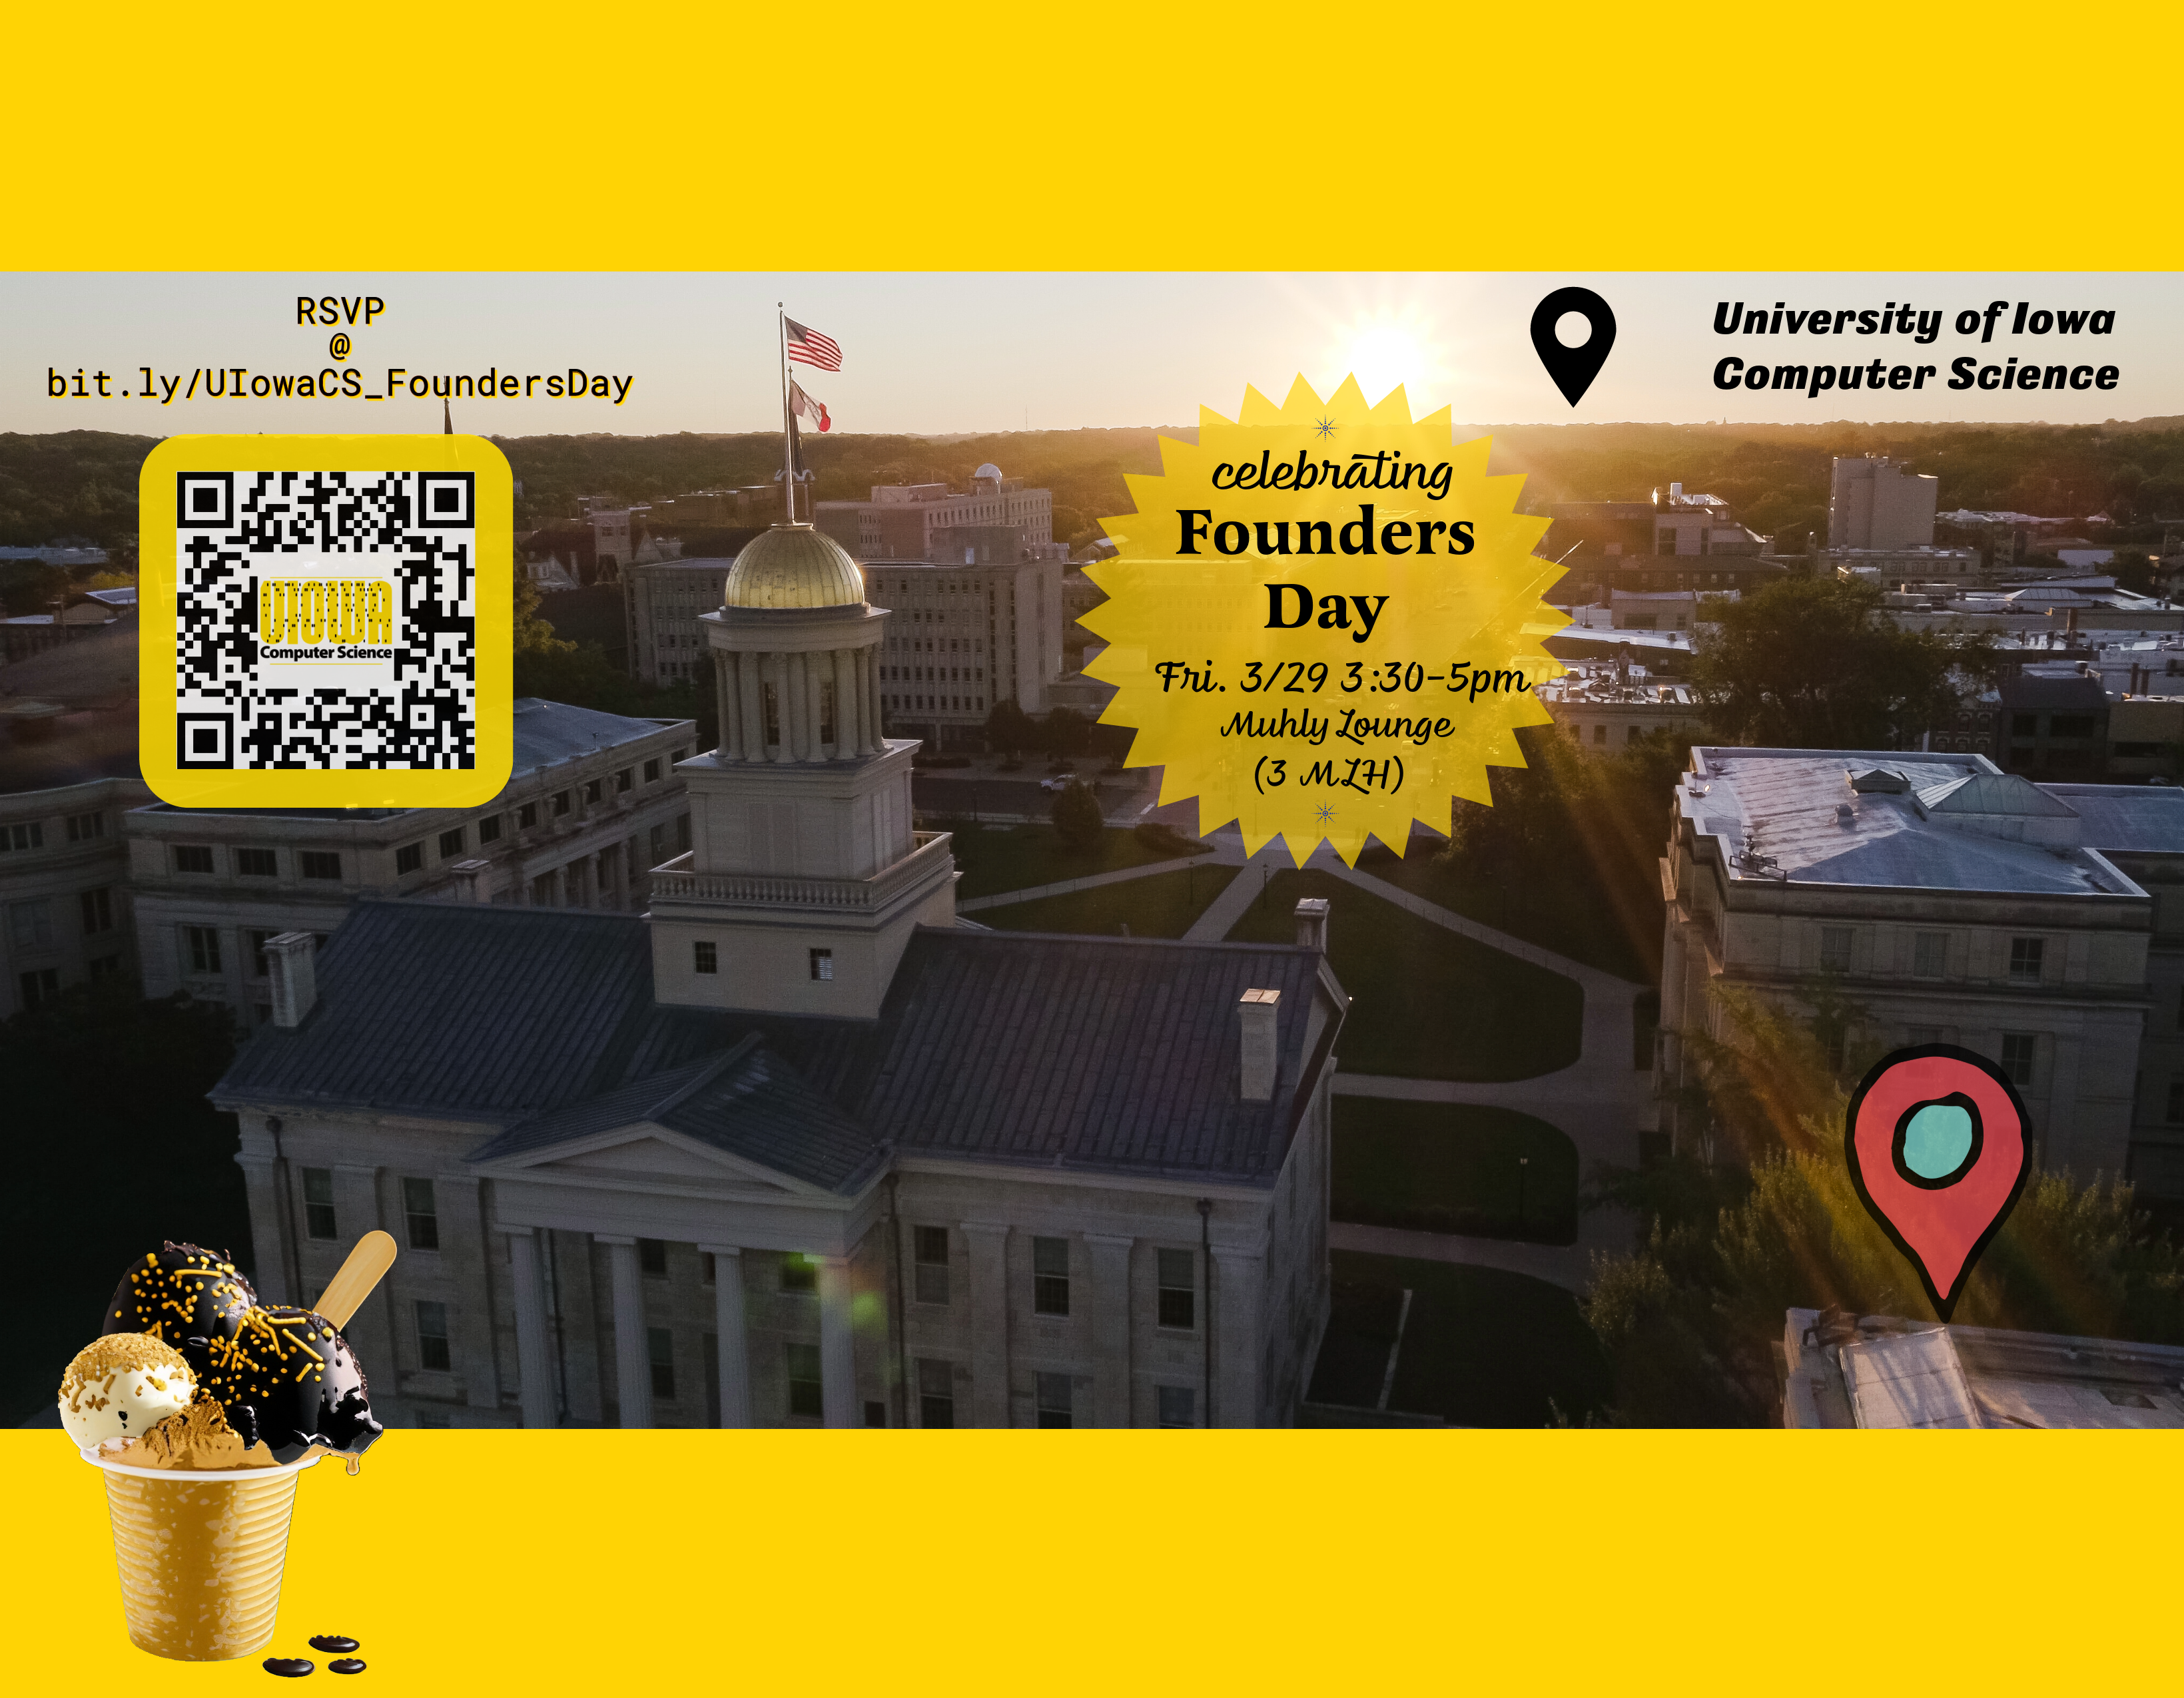 On the occasion of our 58th anniversary, the Department of Computer Science at Iowa cordially invites you to attend our inaugural Founders Day Celebration. This event will be held Wednesday, March 29, from 3:30 to 5 p.m. in the Muhly Lounge (3 MLH).